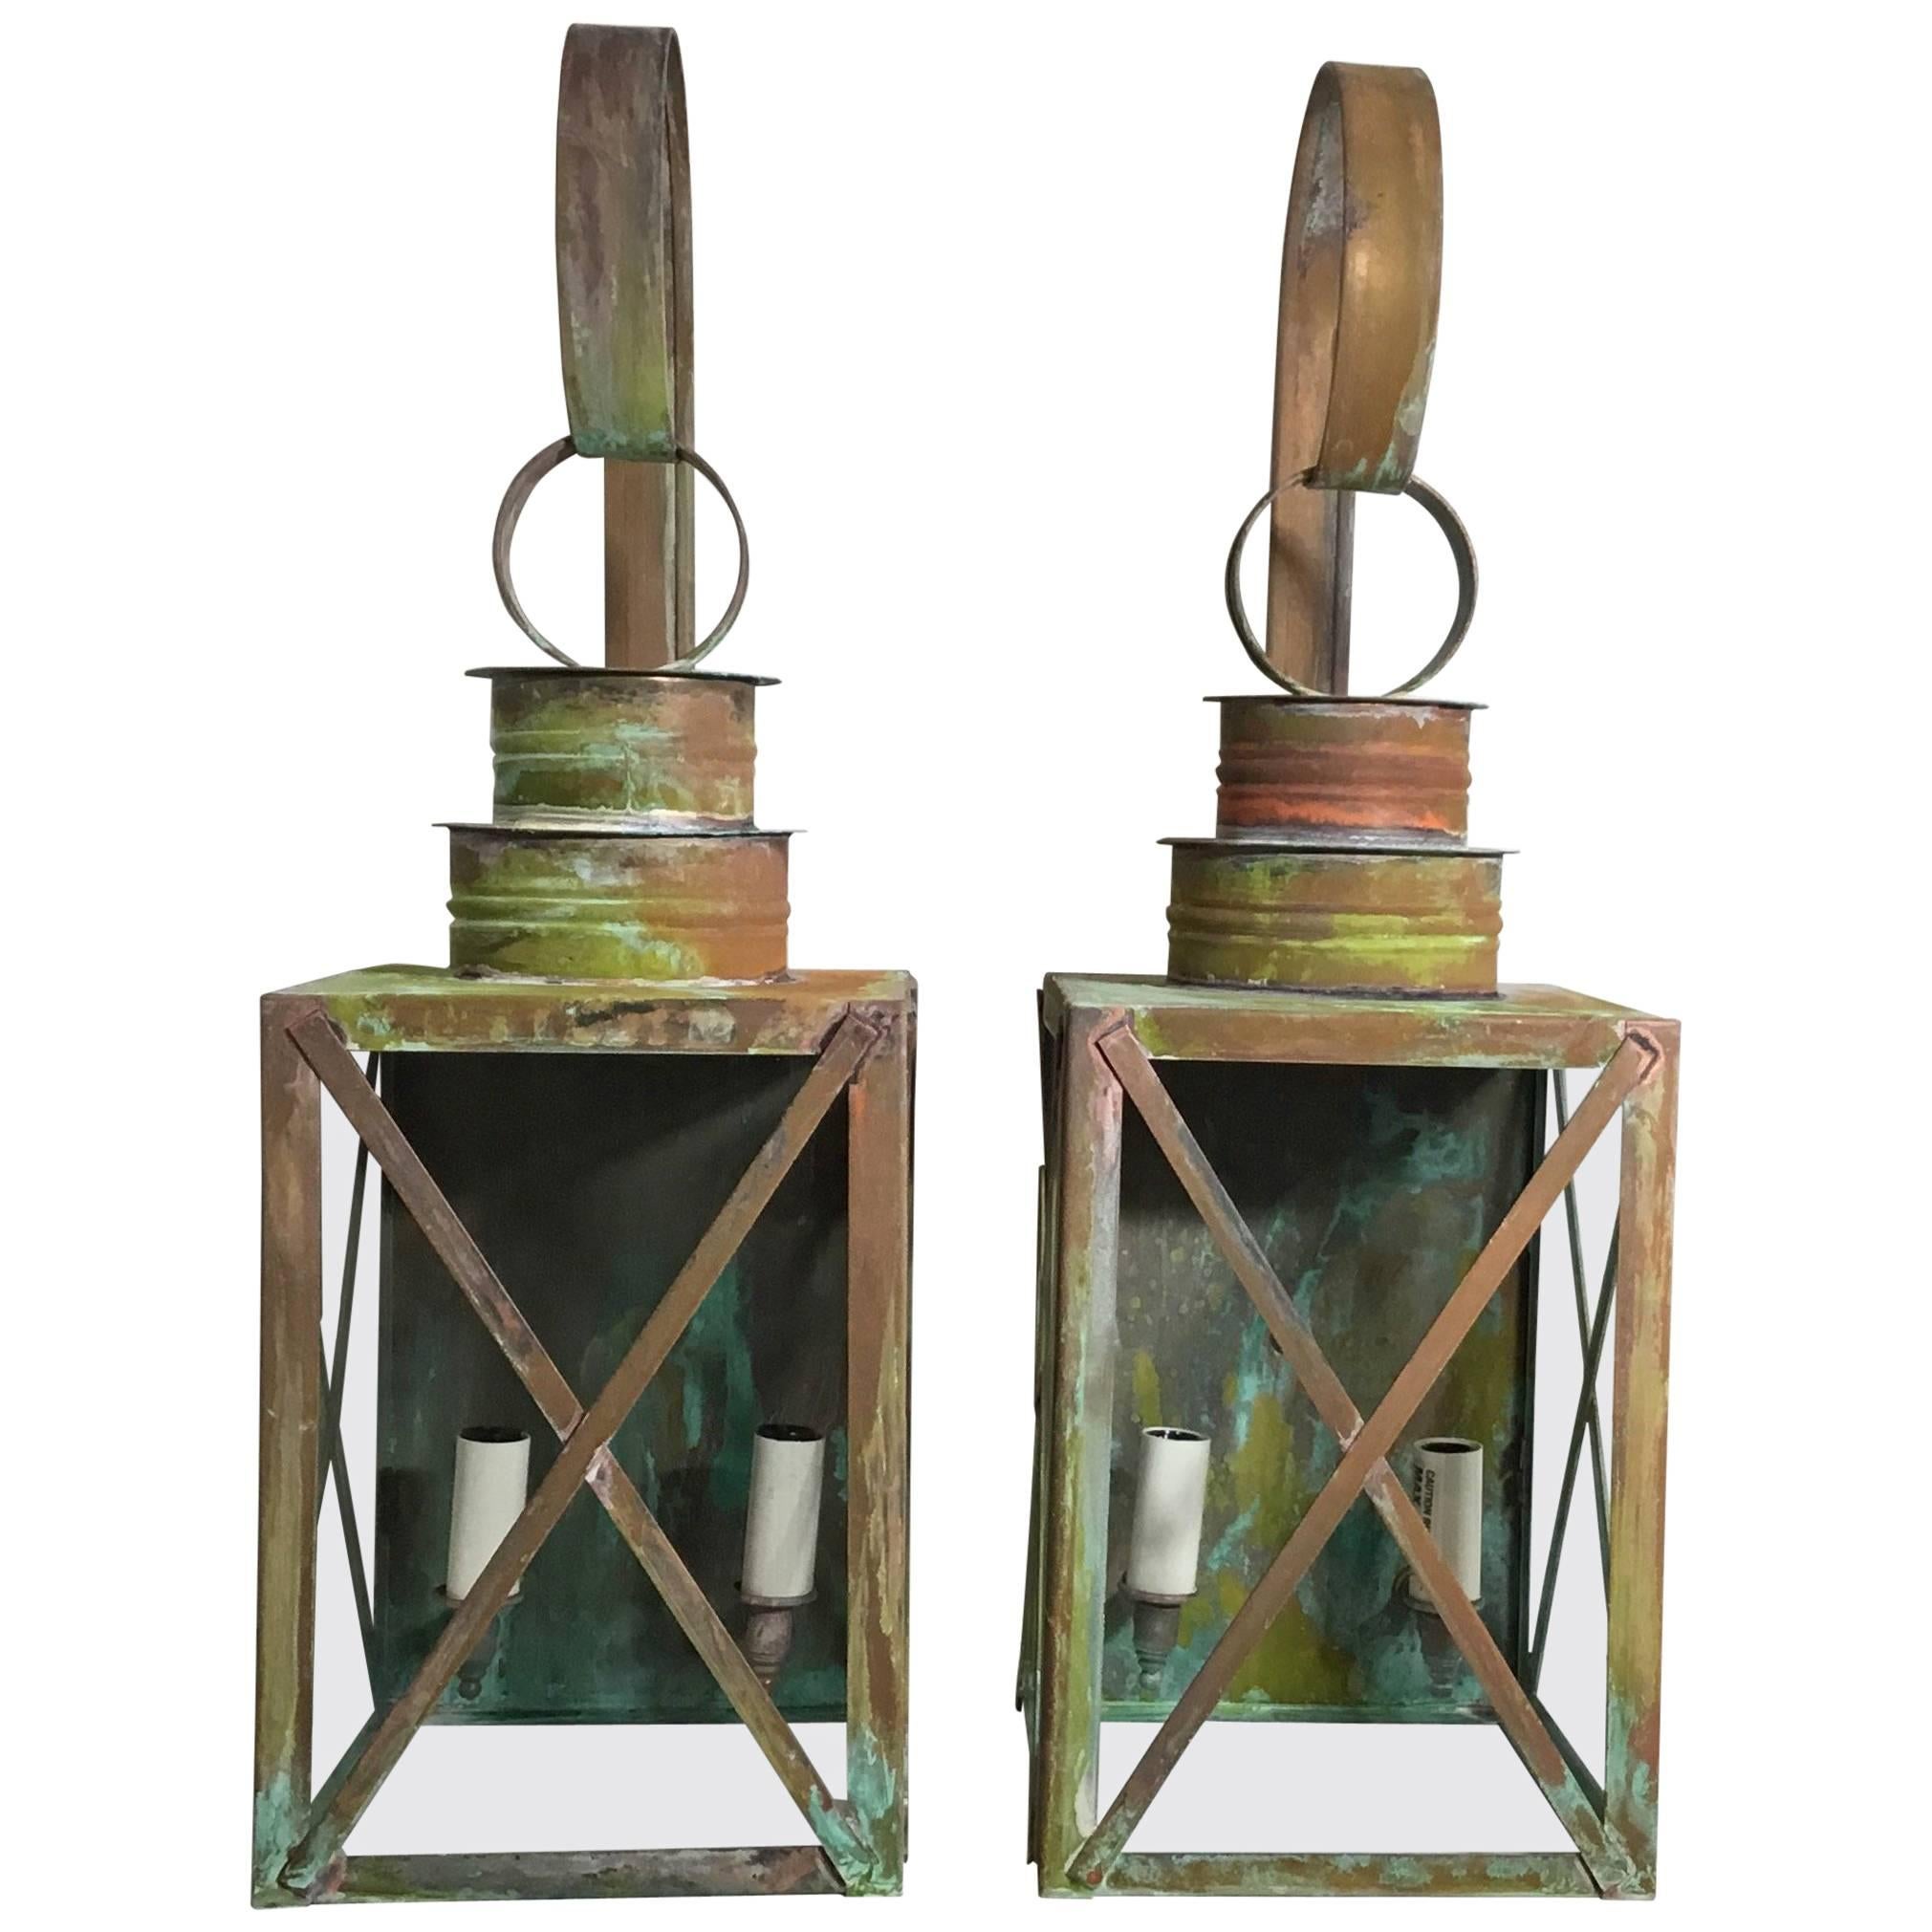 Pair of Architectural Copper Wall Lantern